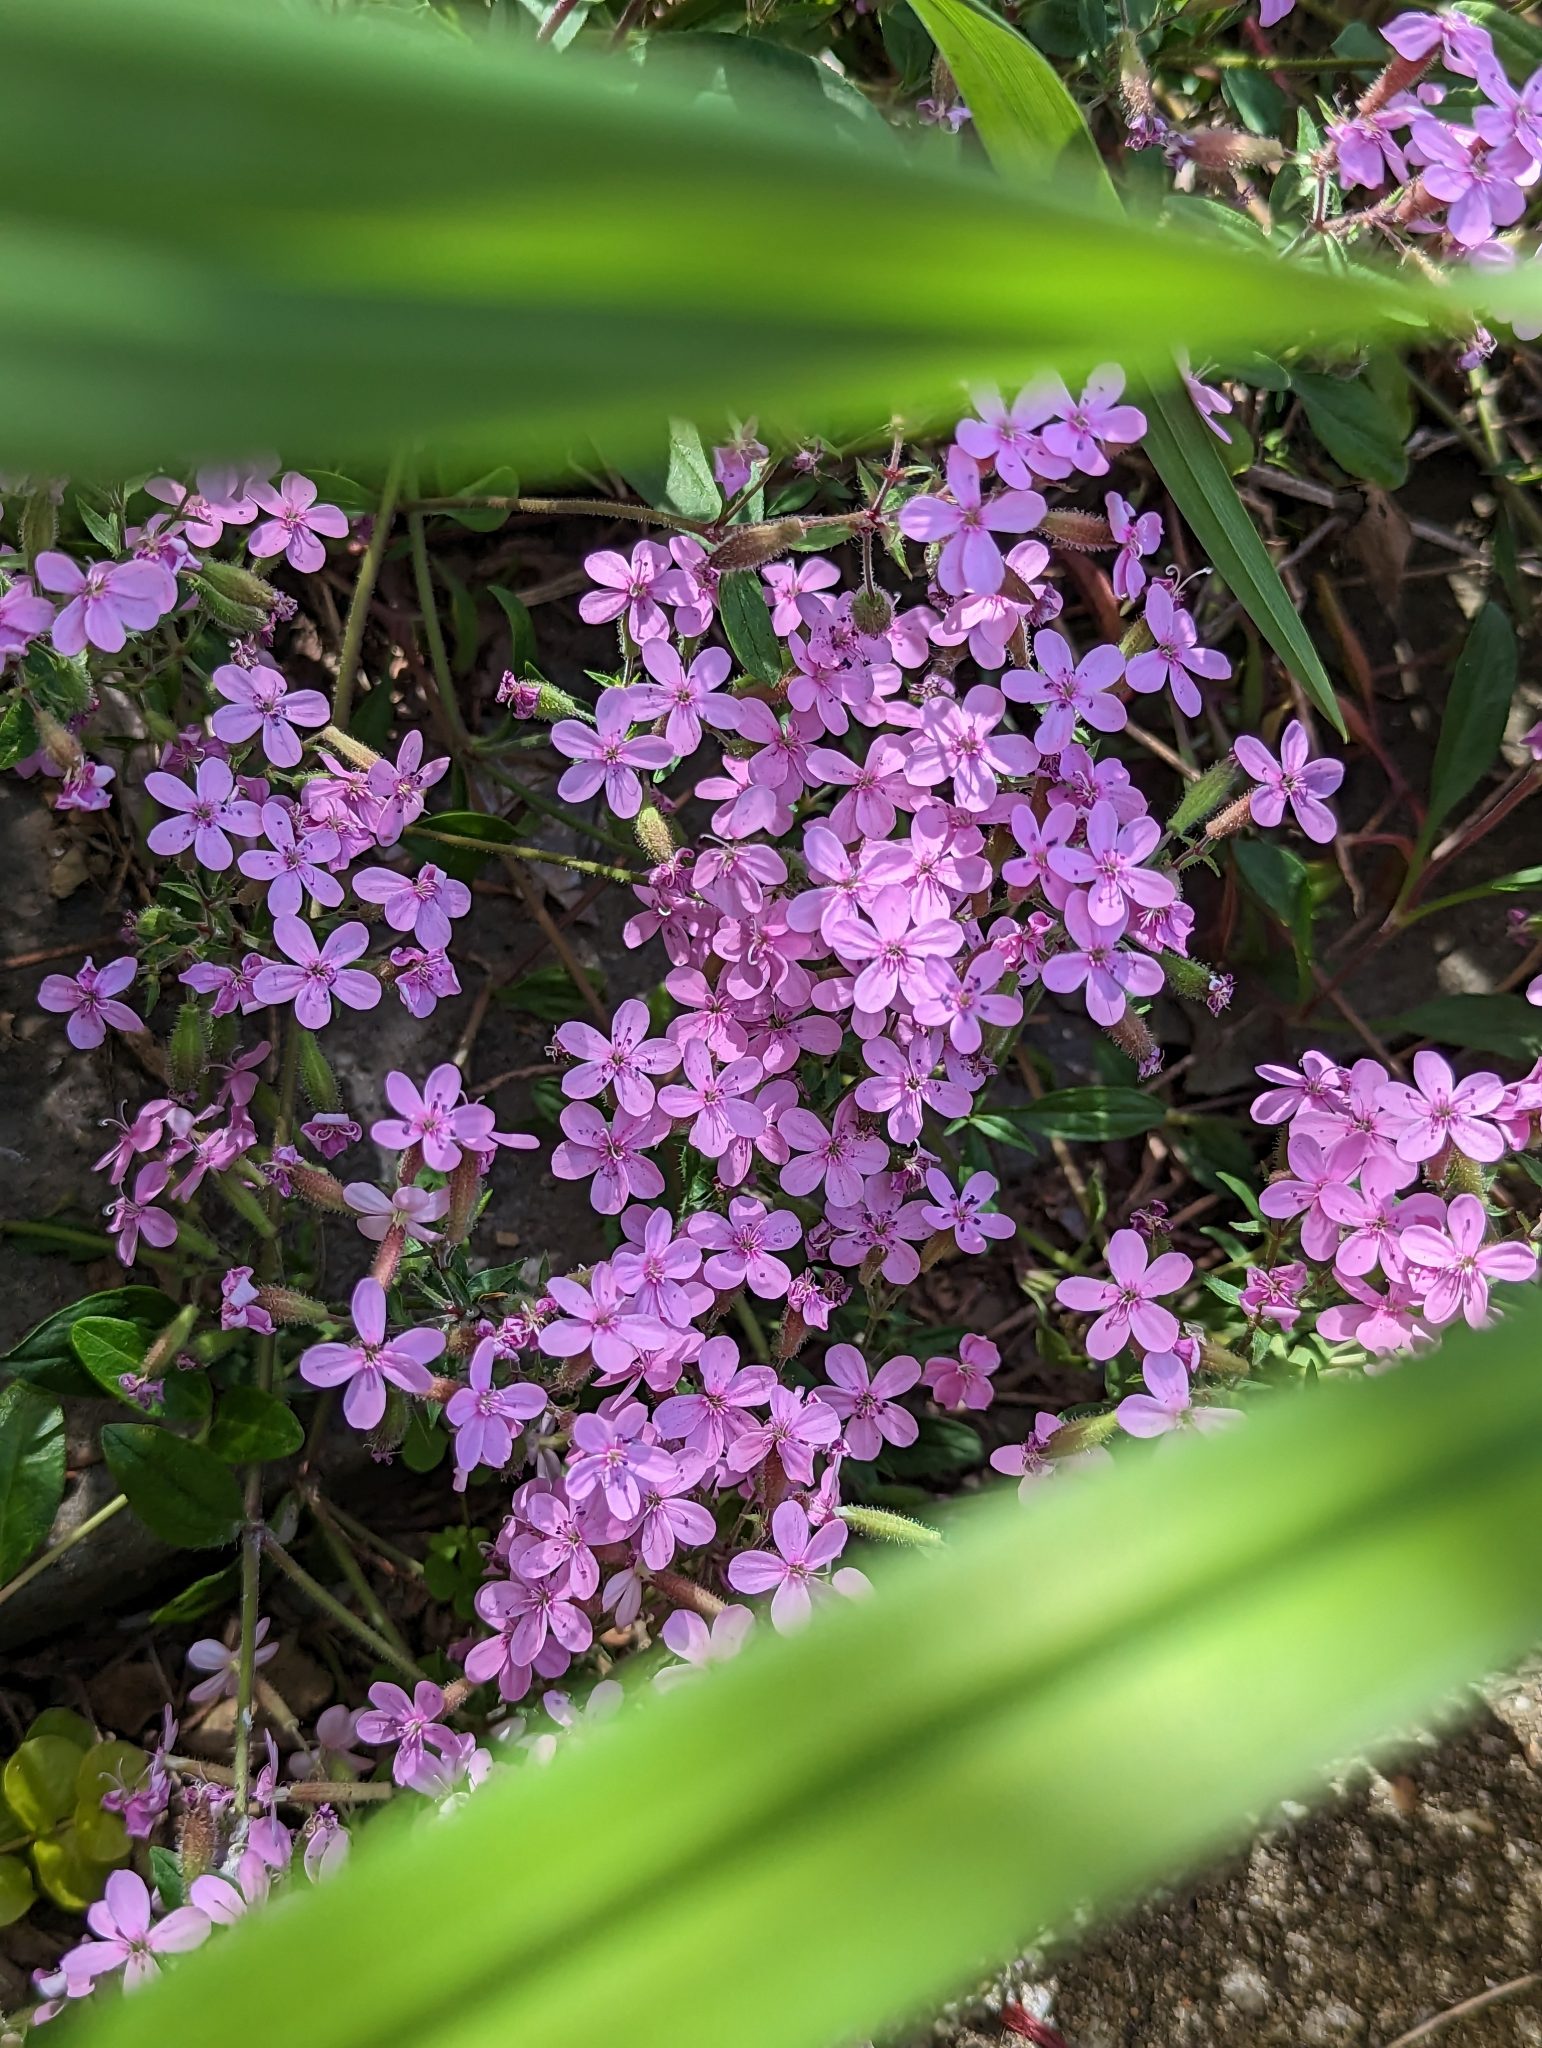 A bunch of the tiny purple flowers